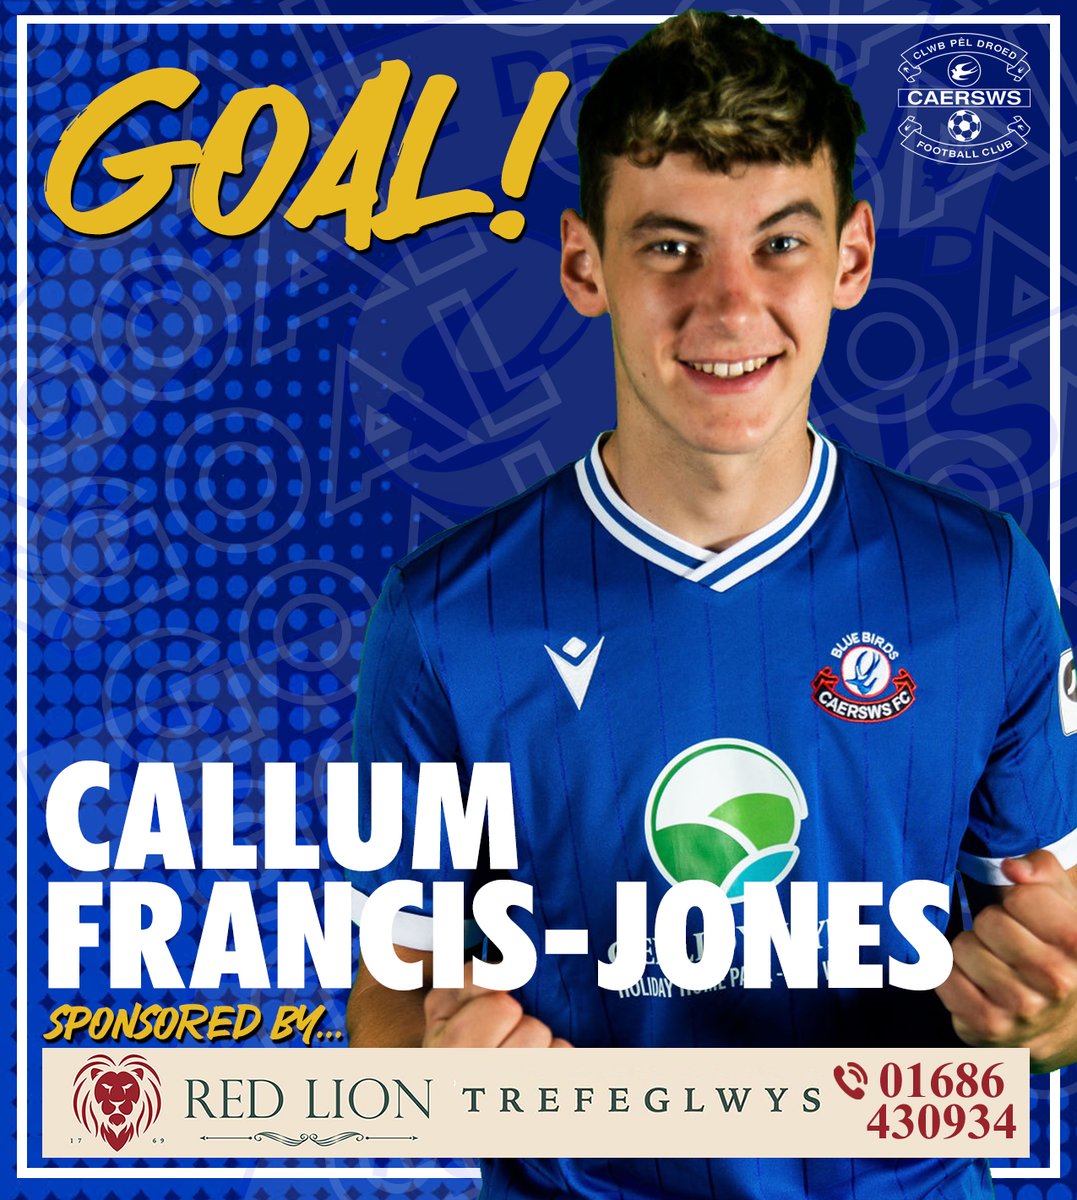 GOOAAAL! CFJ nets on 5 minutes to put the Bluebirds ahead in the derby Versus Llanidloes Town - his eighth of his debut campaign #sws #bluebirds #JDCymruNorth (1-0)